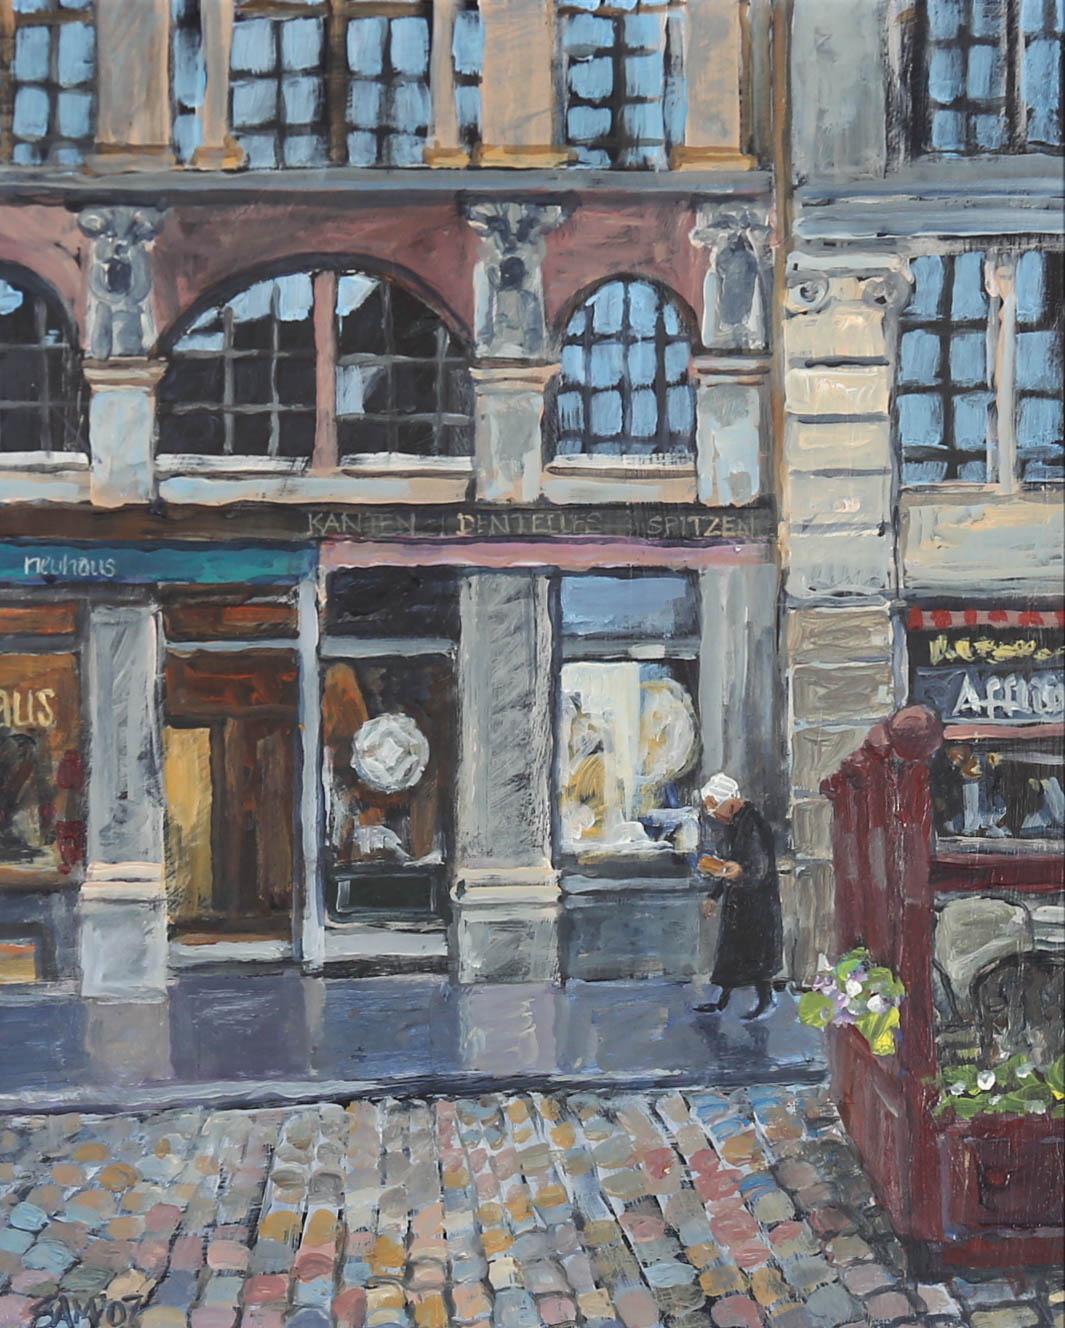 A charming scene depicting the cobbled streets of a German town. The artist captures the neighbouring 'Neuhaus' chocolate shop and lace shop and their decorative shop windows using small but expressive brushstrokes. Signed and dated to the lower